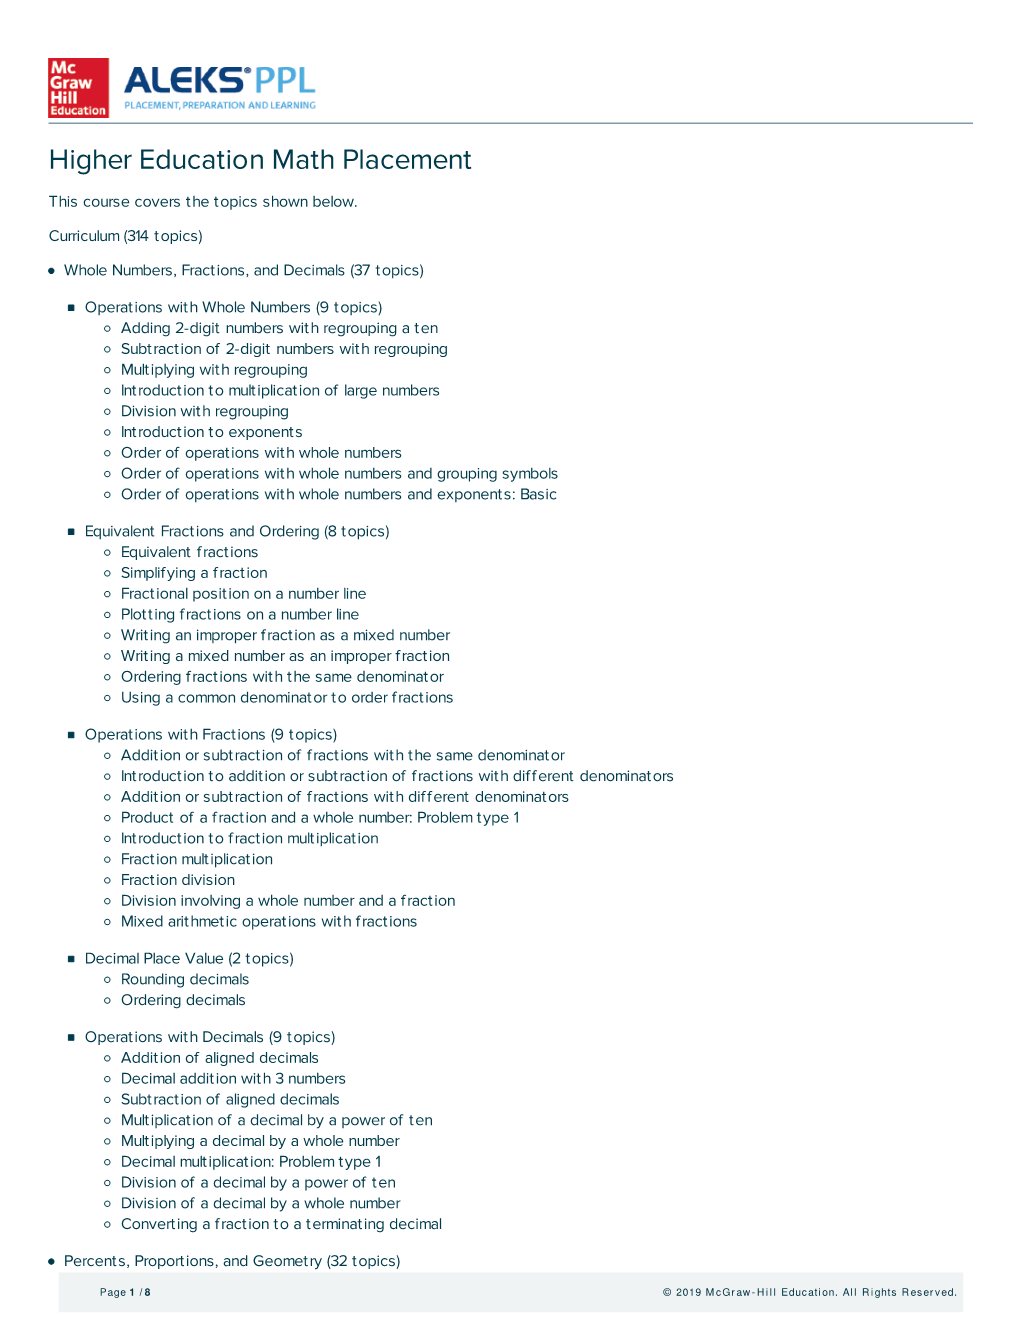 Higher Education Math Placement